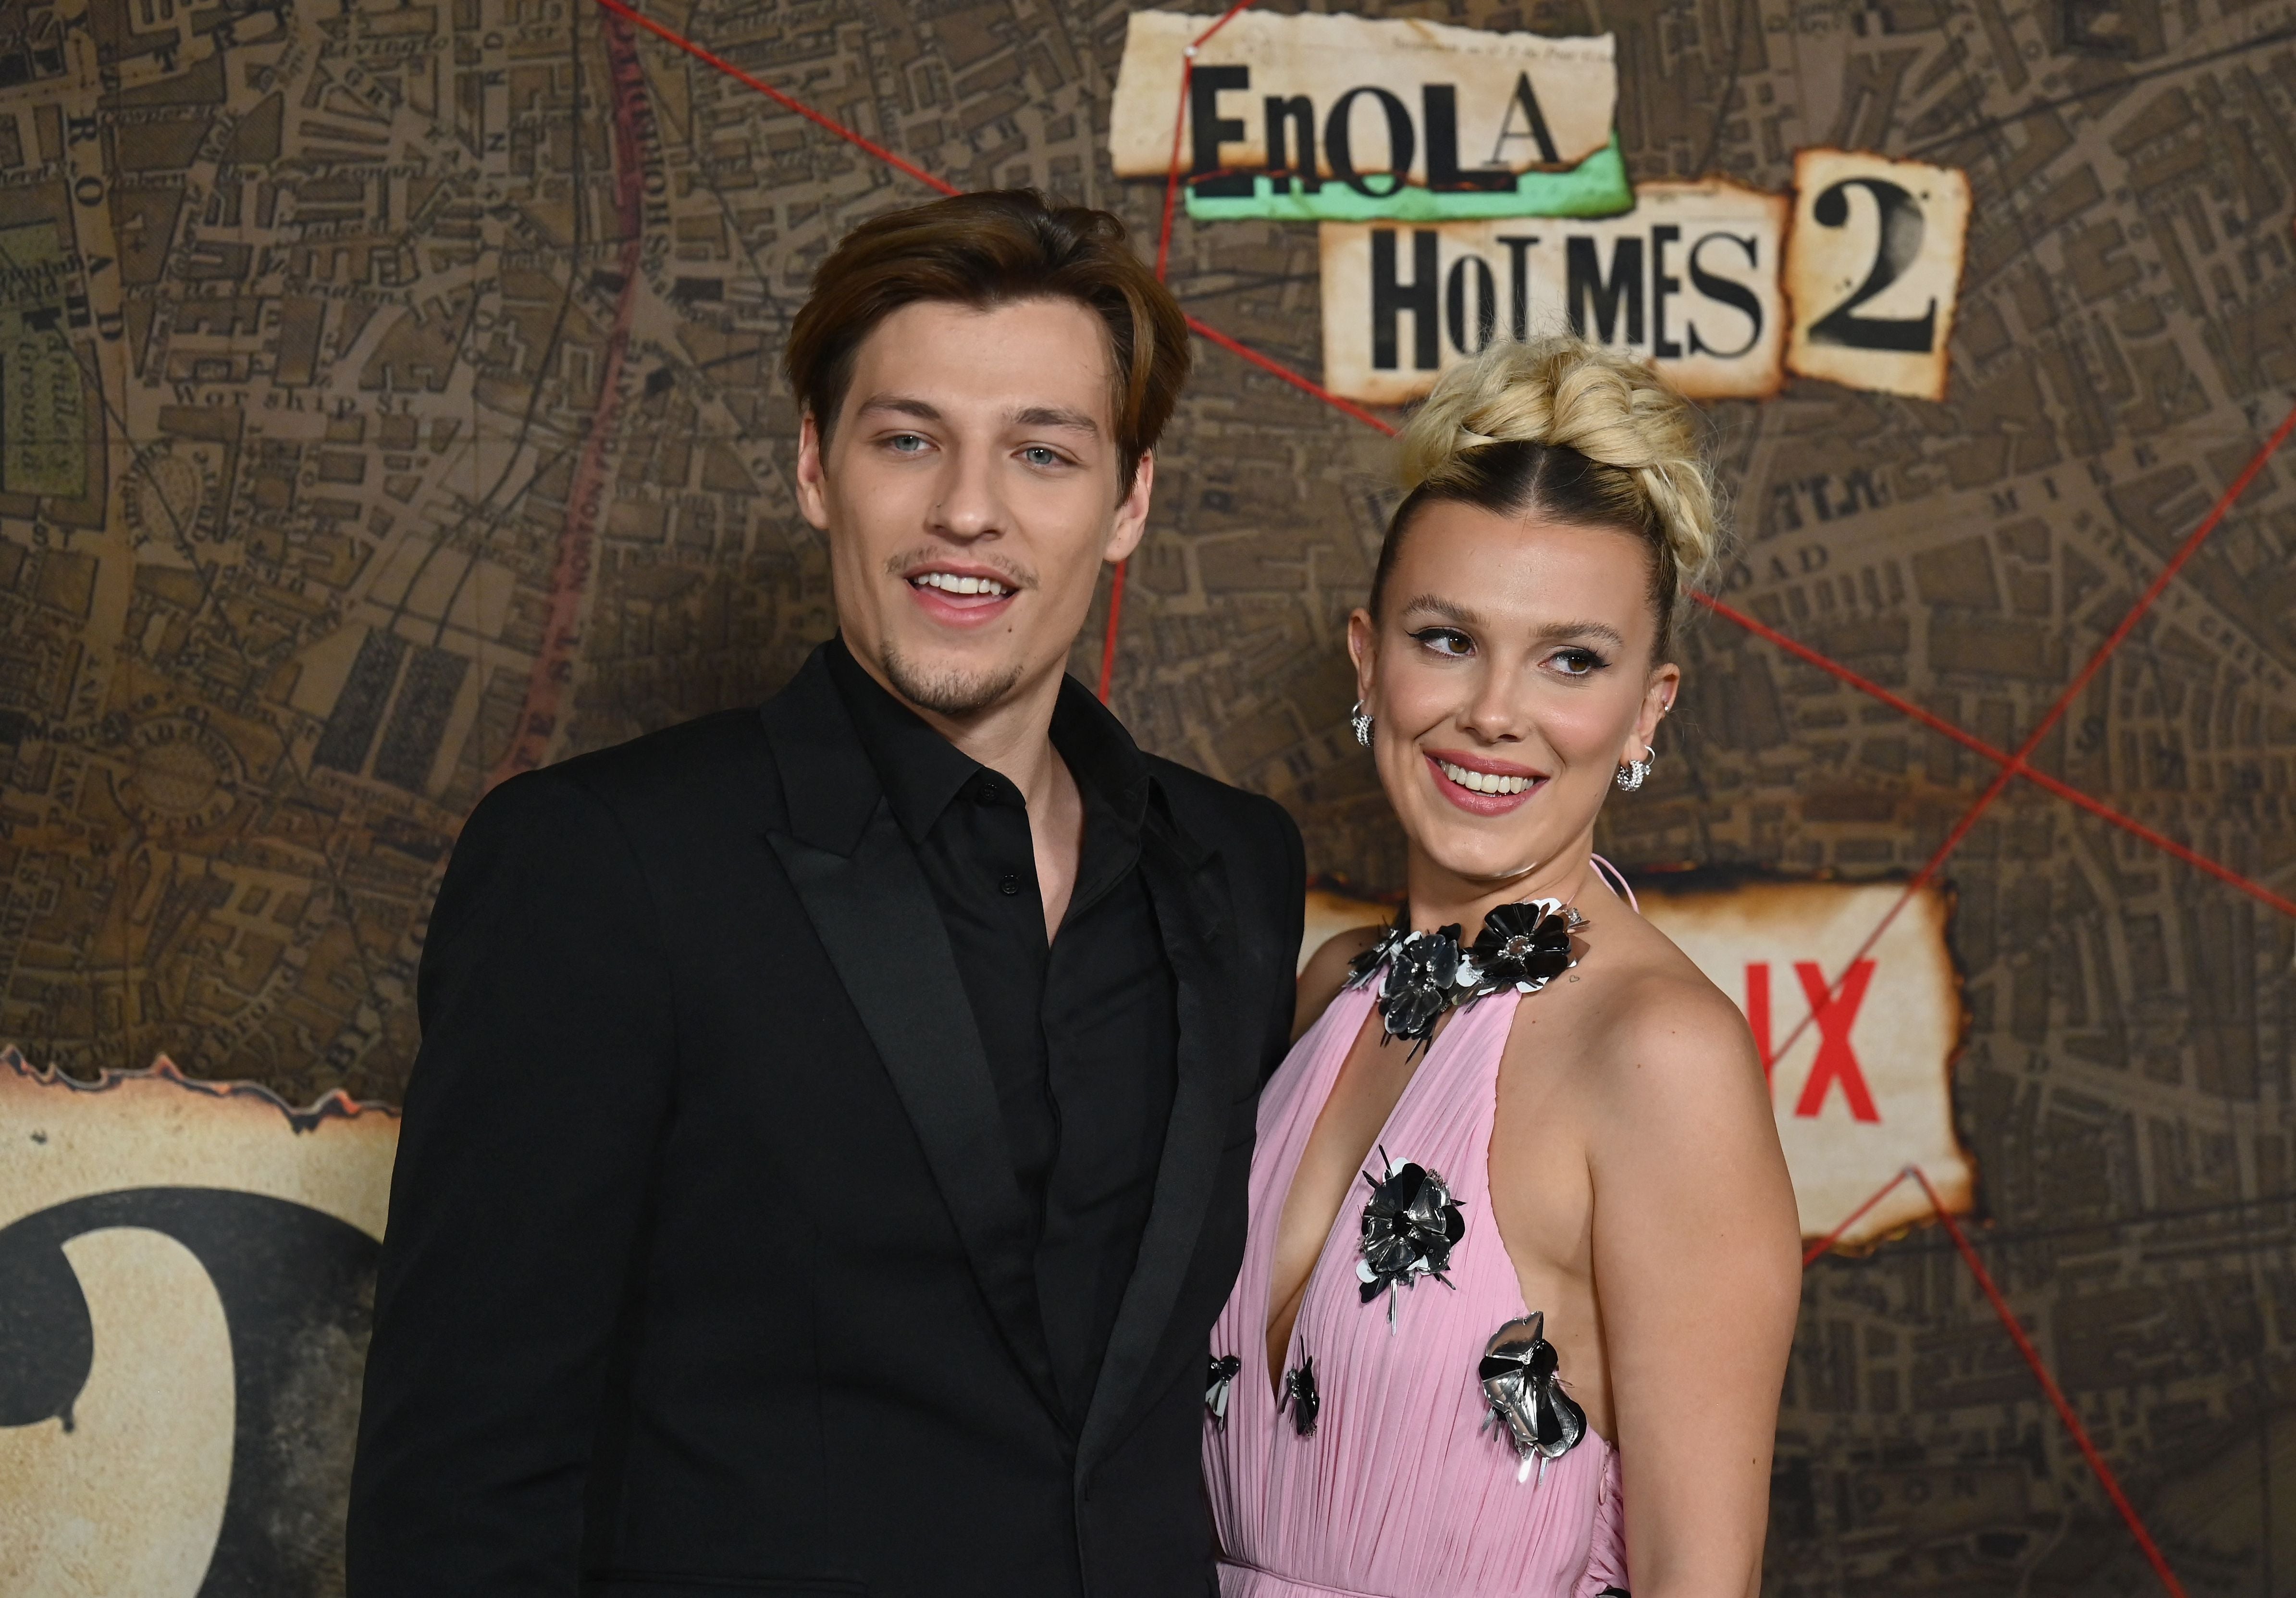 Millie Bobby Brown Engaged to Jake Bongiovi: What We Know